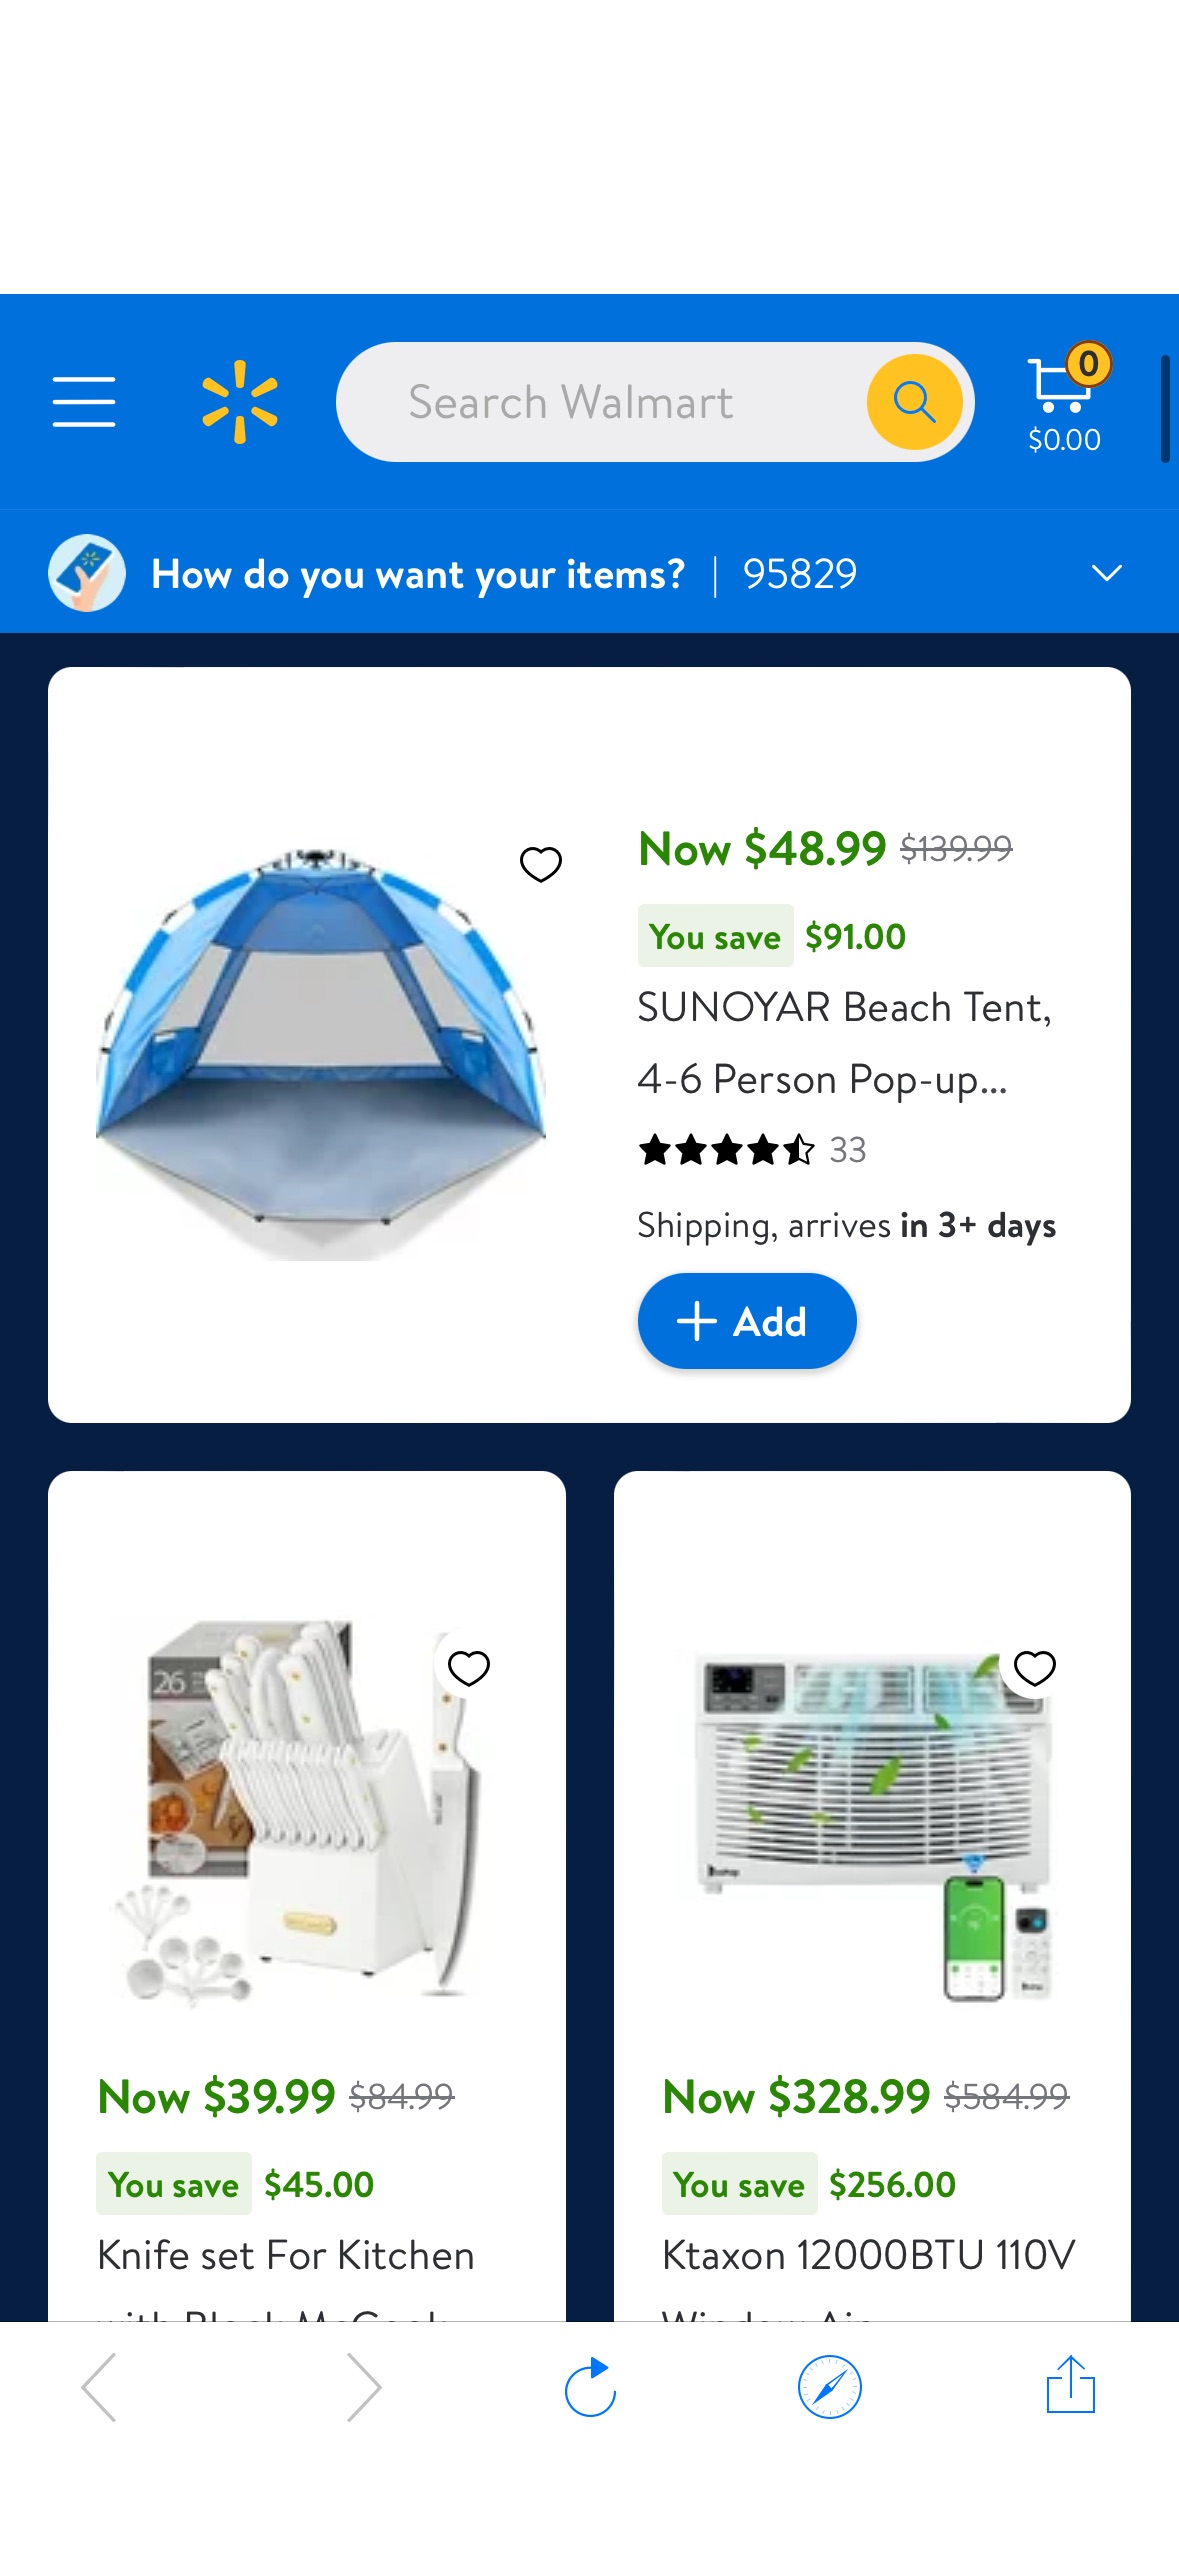 Up to 65% Off Flash Deals at Walmart!